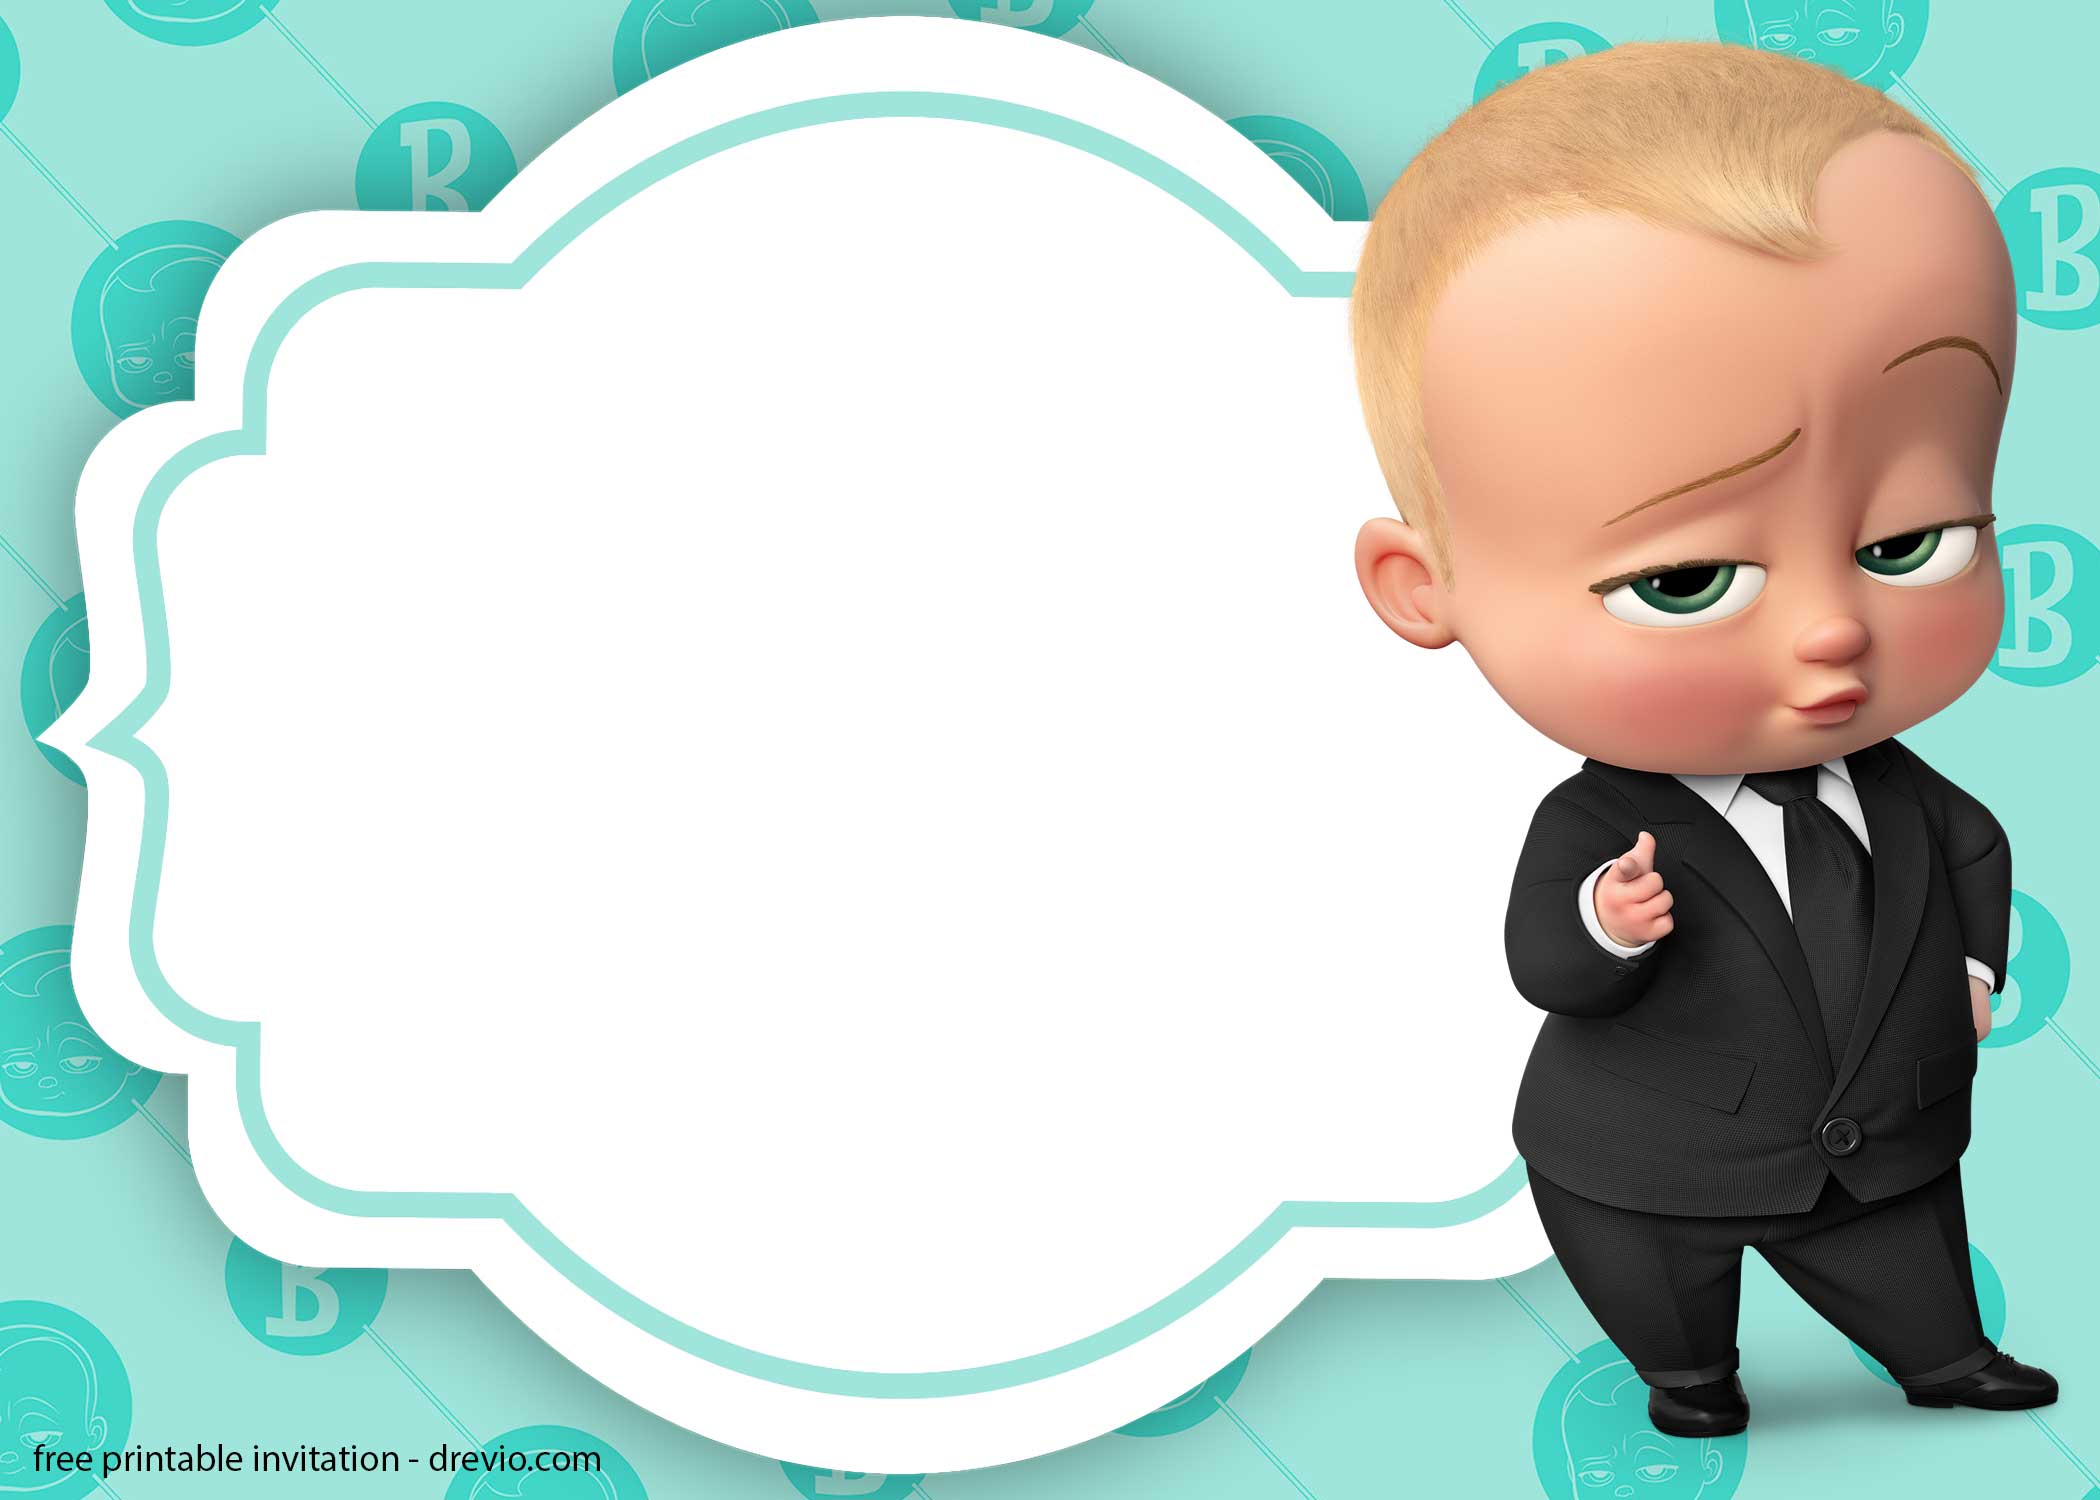 Baby Boss Invitation Template for Your Adorable Little Boss | Download